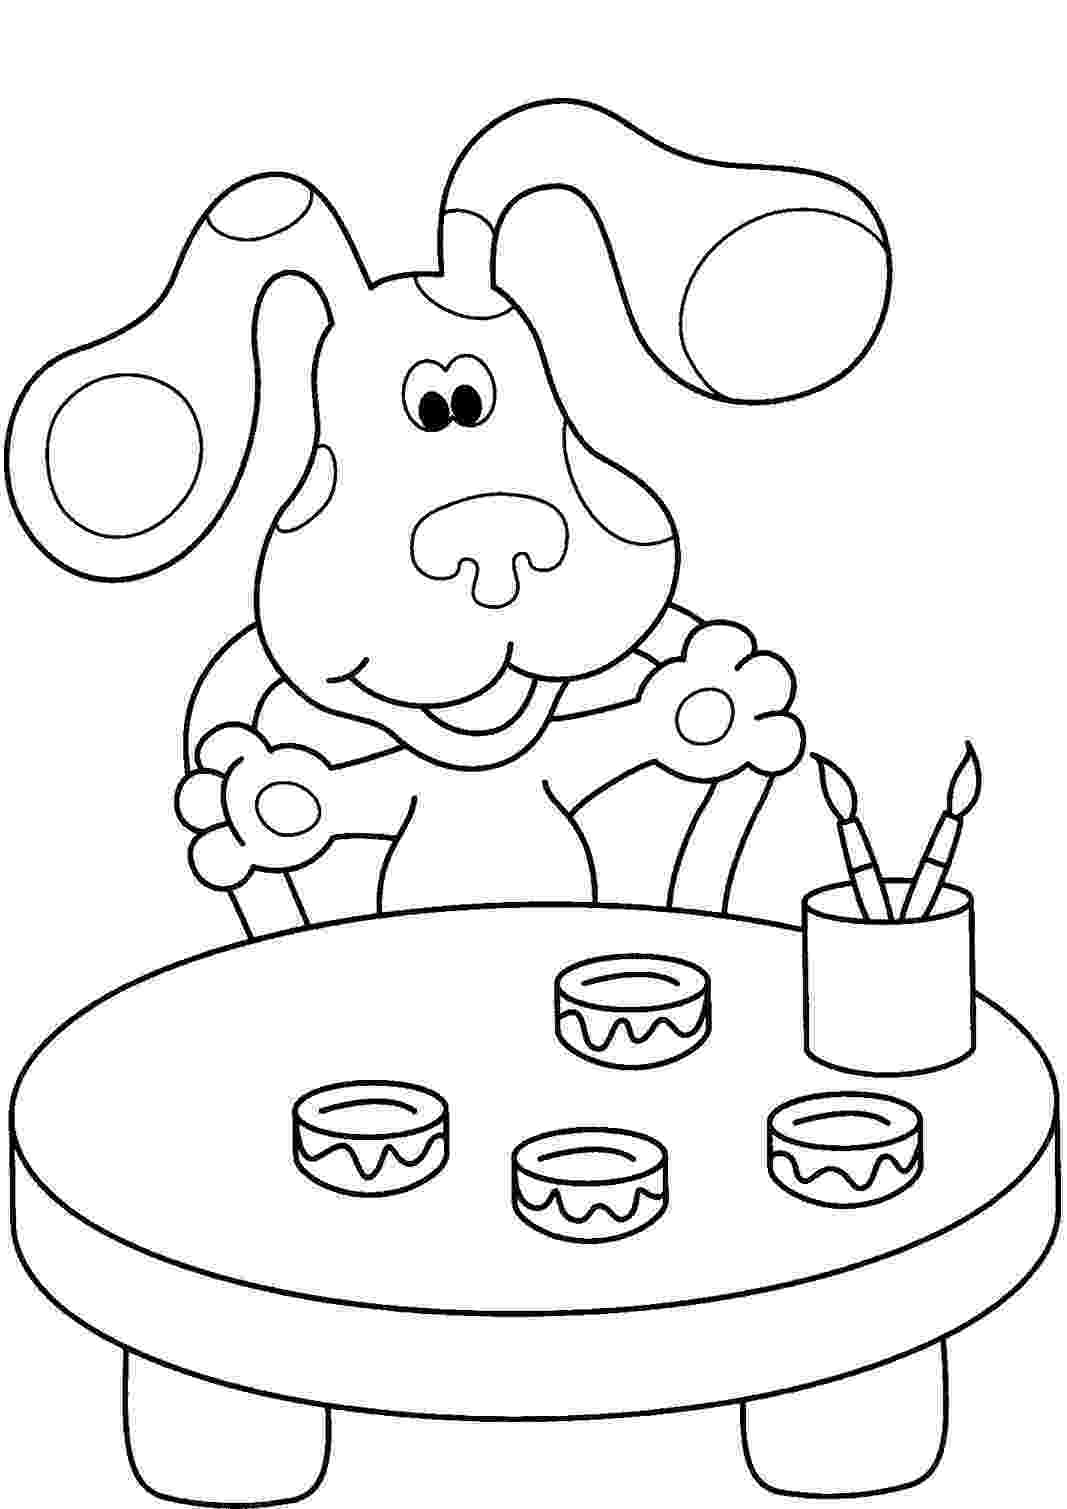 blues clues coloring pages free printable blues clues coloring pages for kids clues pages blues coloring 